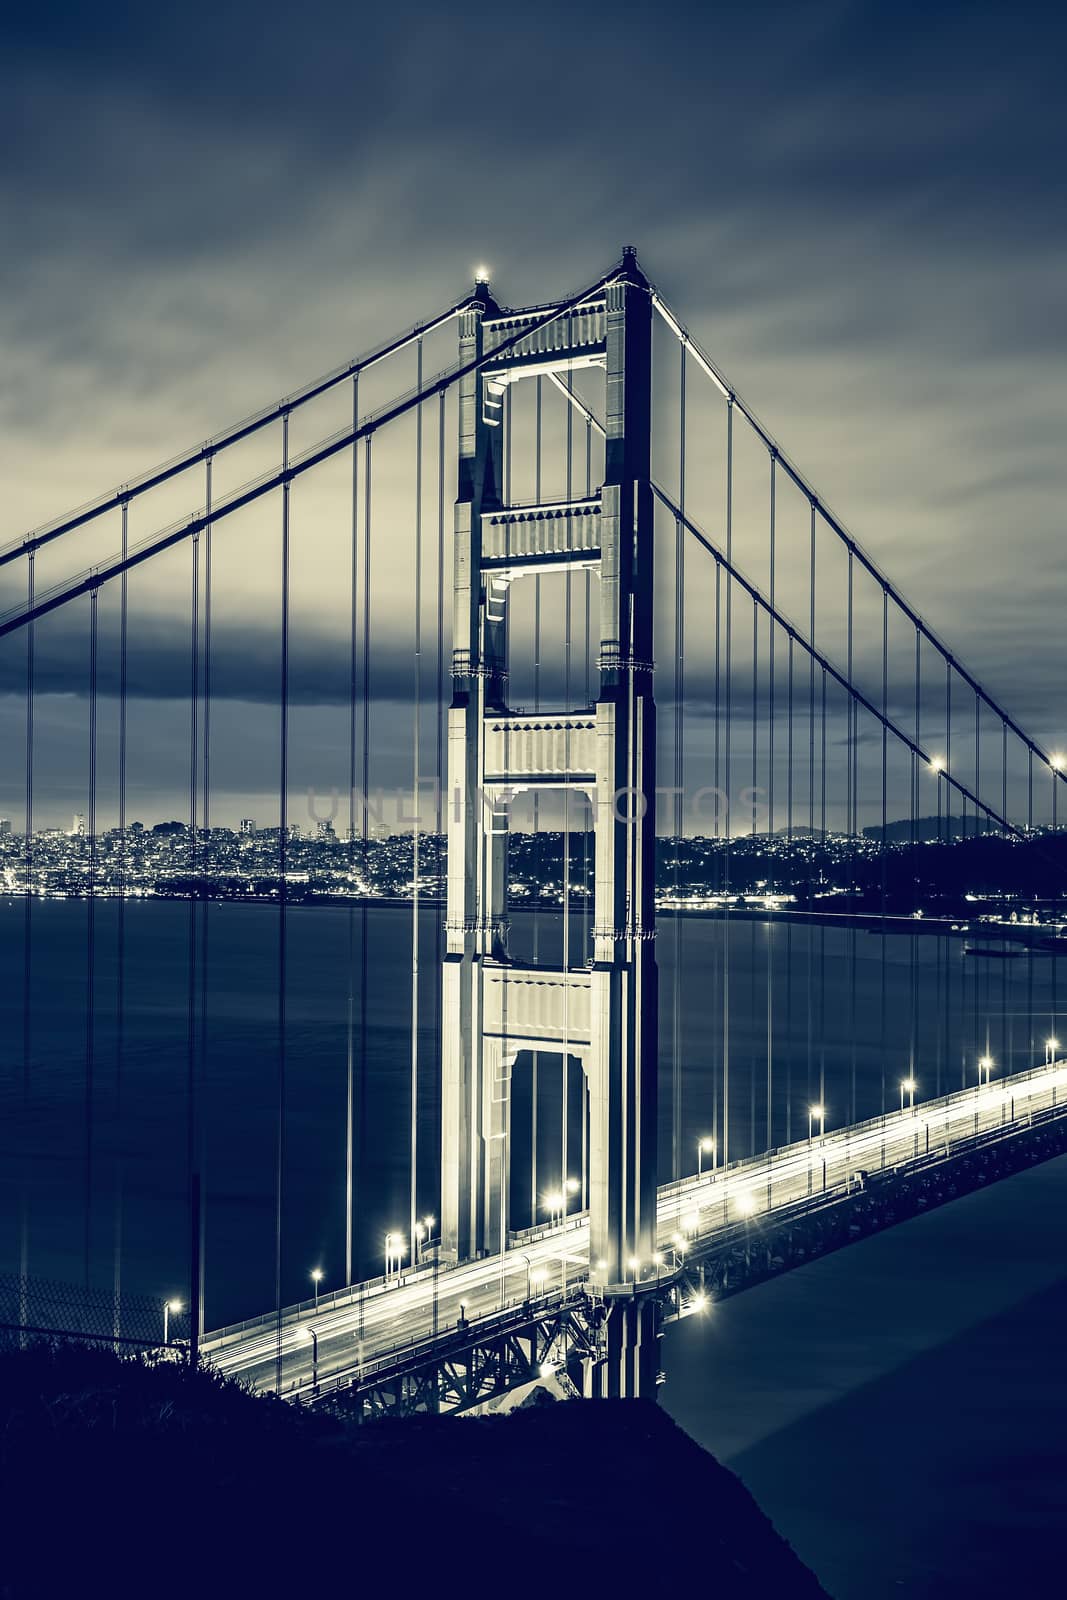 Famous Golden Gate Bridge, special photographic processing by vwalakte